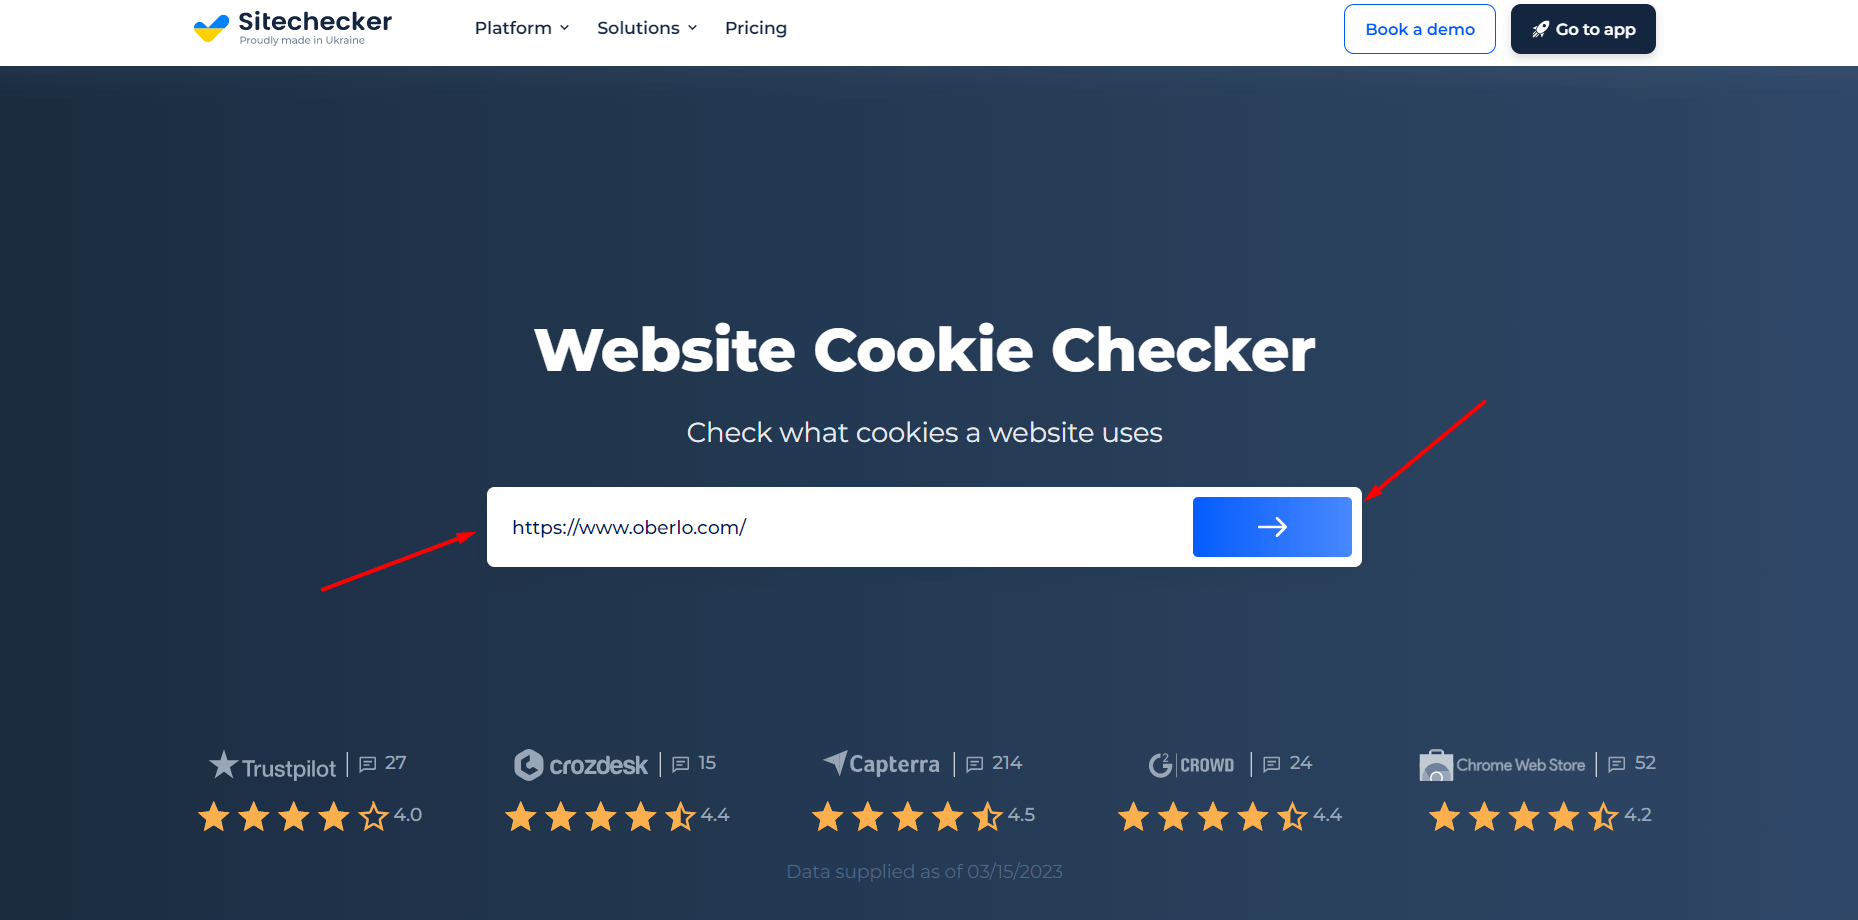 The website cookie checker tool with an example URL